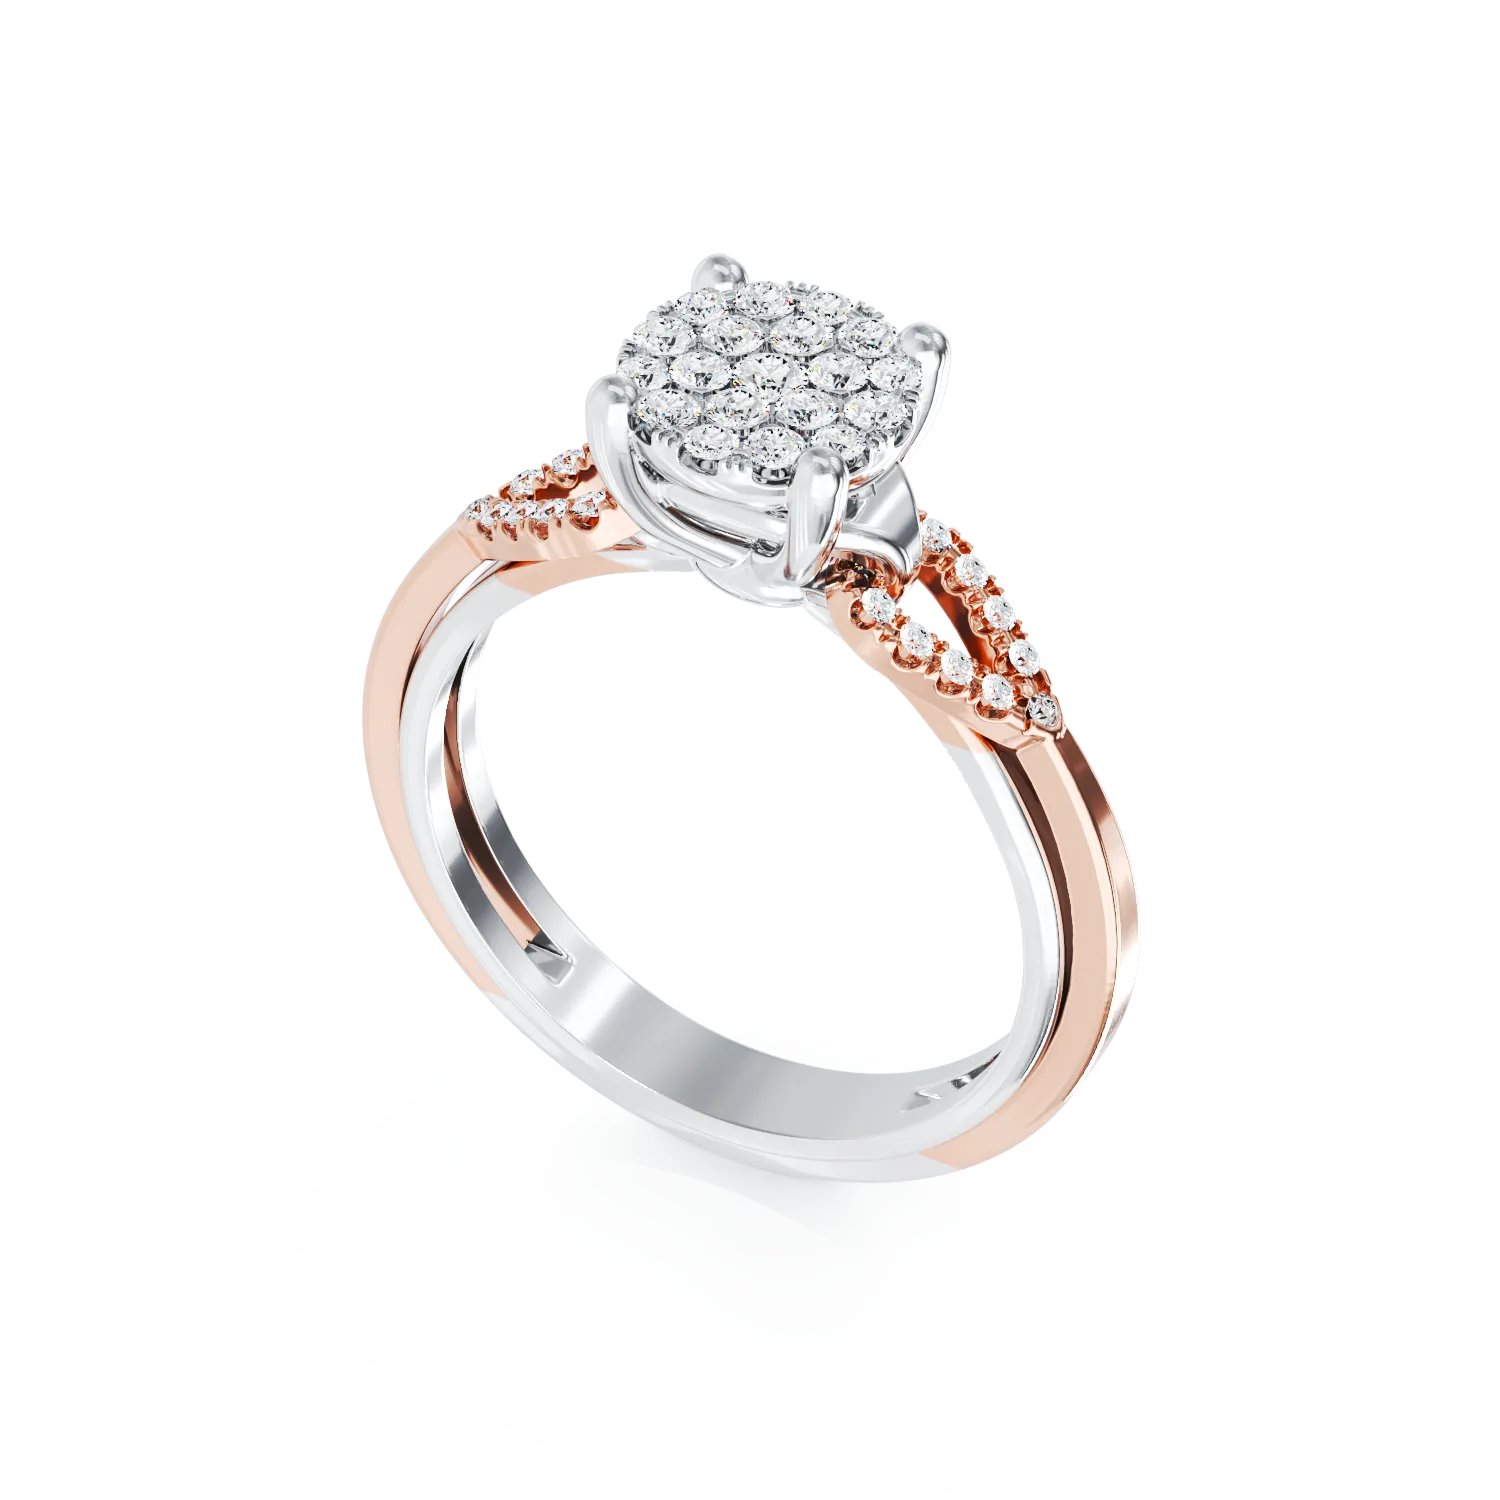 18K white-rose gold engagement ring with 0.35ct diamonds